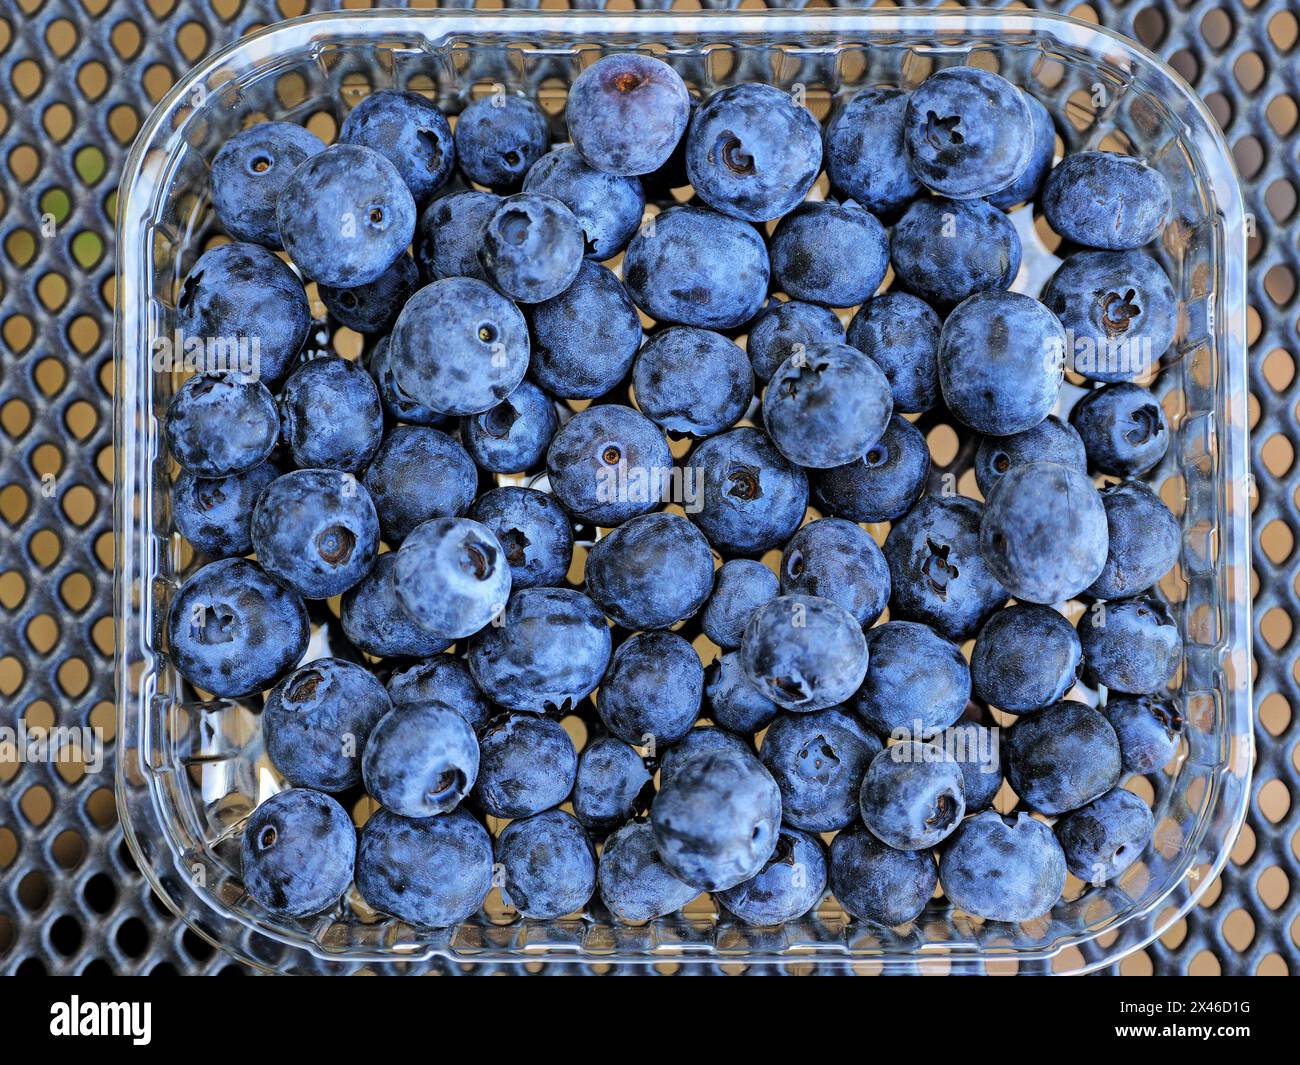 Healthy, delicious, antioxidant-rich blueberries! Boost immunity, heart health, brain function. Nature's supe Stock Photo